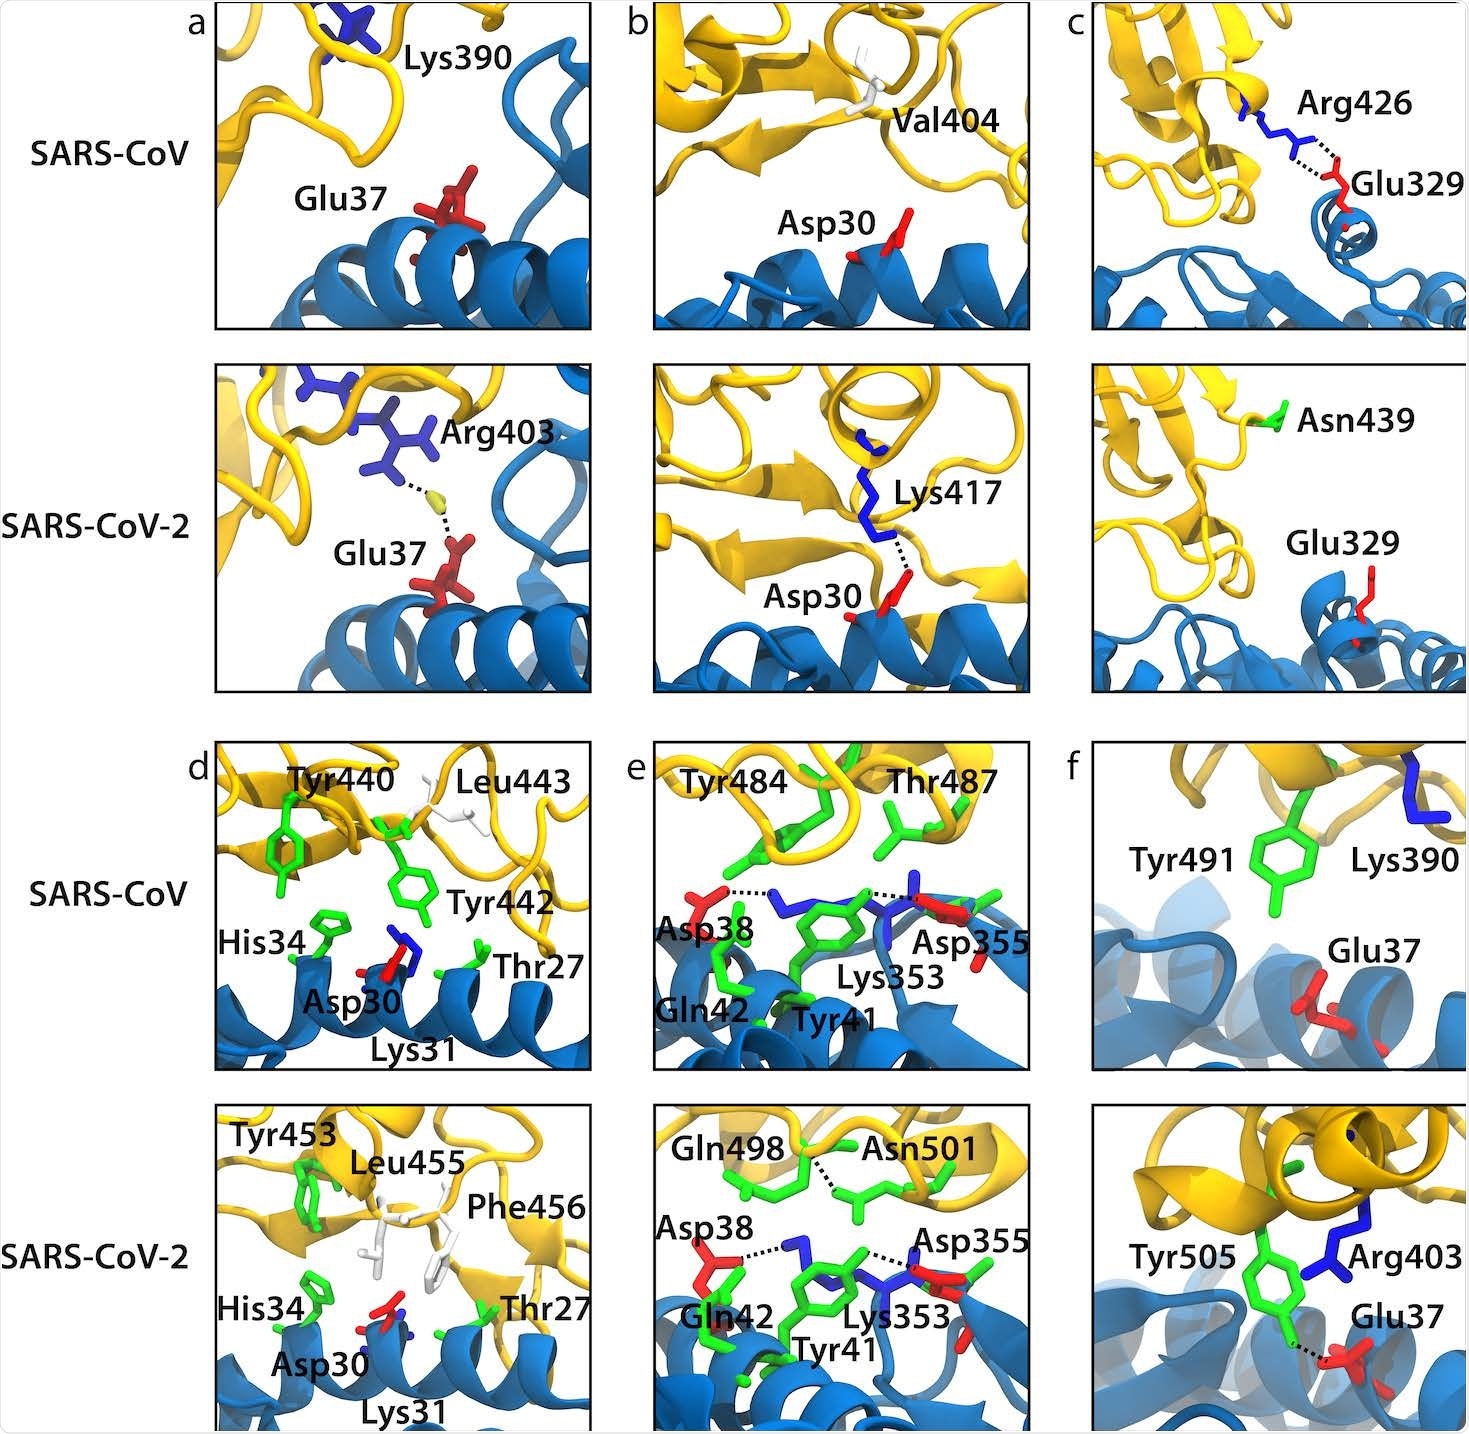 Snapshots from our MD simulations that illustrate the difference in ACE2 binding between SARS-CoV and SARS-CoV-2 for the selected mutations. ACE2 and RBD backbones are shown in blue and yellow, respectively. (a) Arg403/Lys390 (SARS-CoV-2/SARS-CoV numbering). (b) Lys417/Val404. (c) Asn439/Arg426. (d) Leu455/Tyr442. (e) Gln498-Asn501/Tyr484-Thr487. (f) Tyr491/Tyr505.